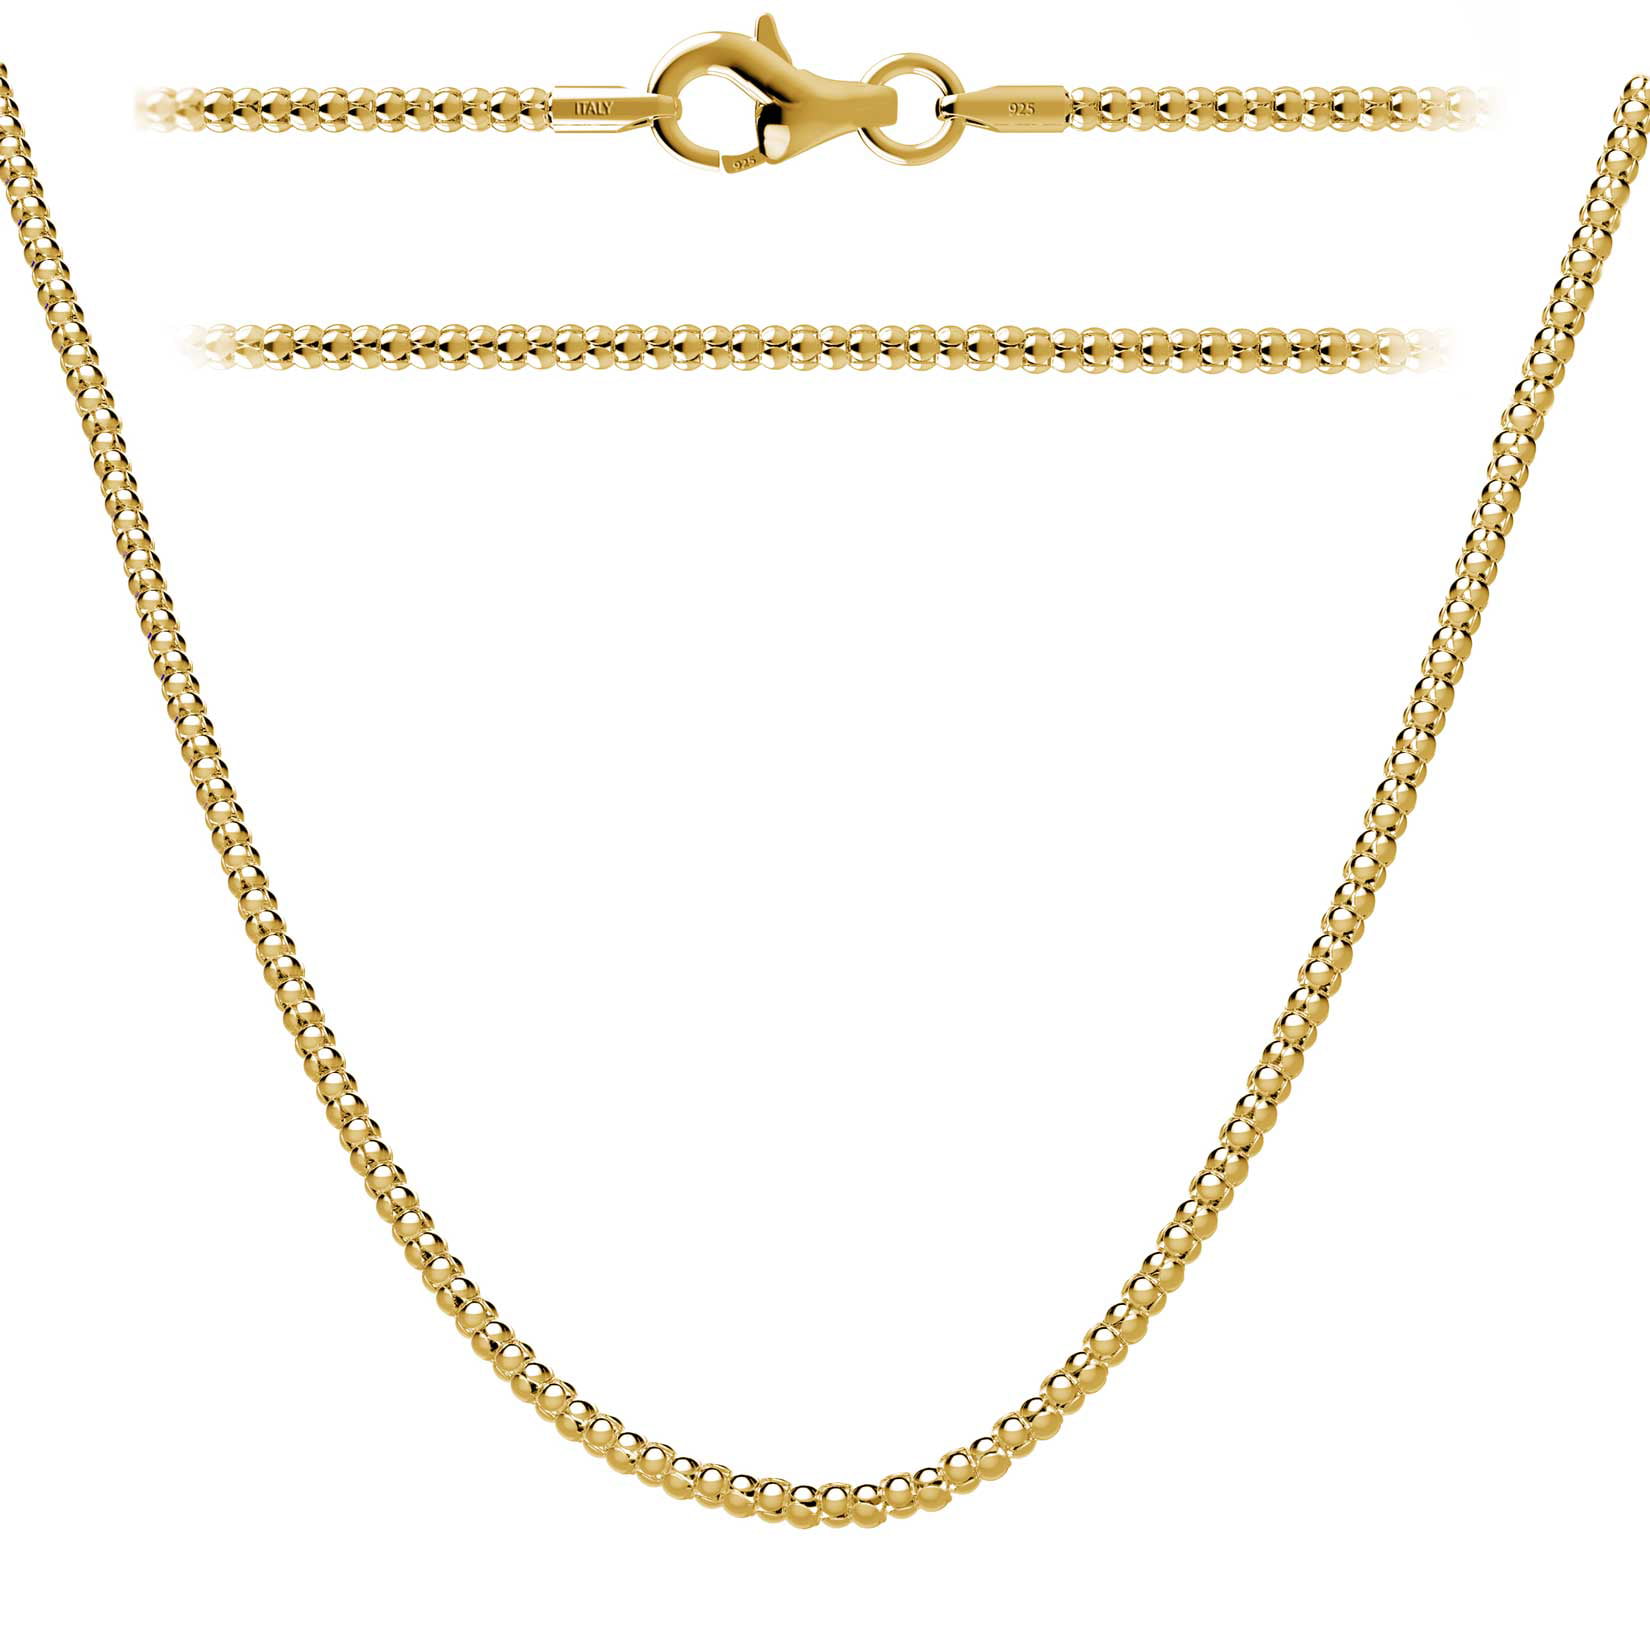 Kezef - Gold Plated Sterling Silver Popcorn Chain Necklace 14 inch ...